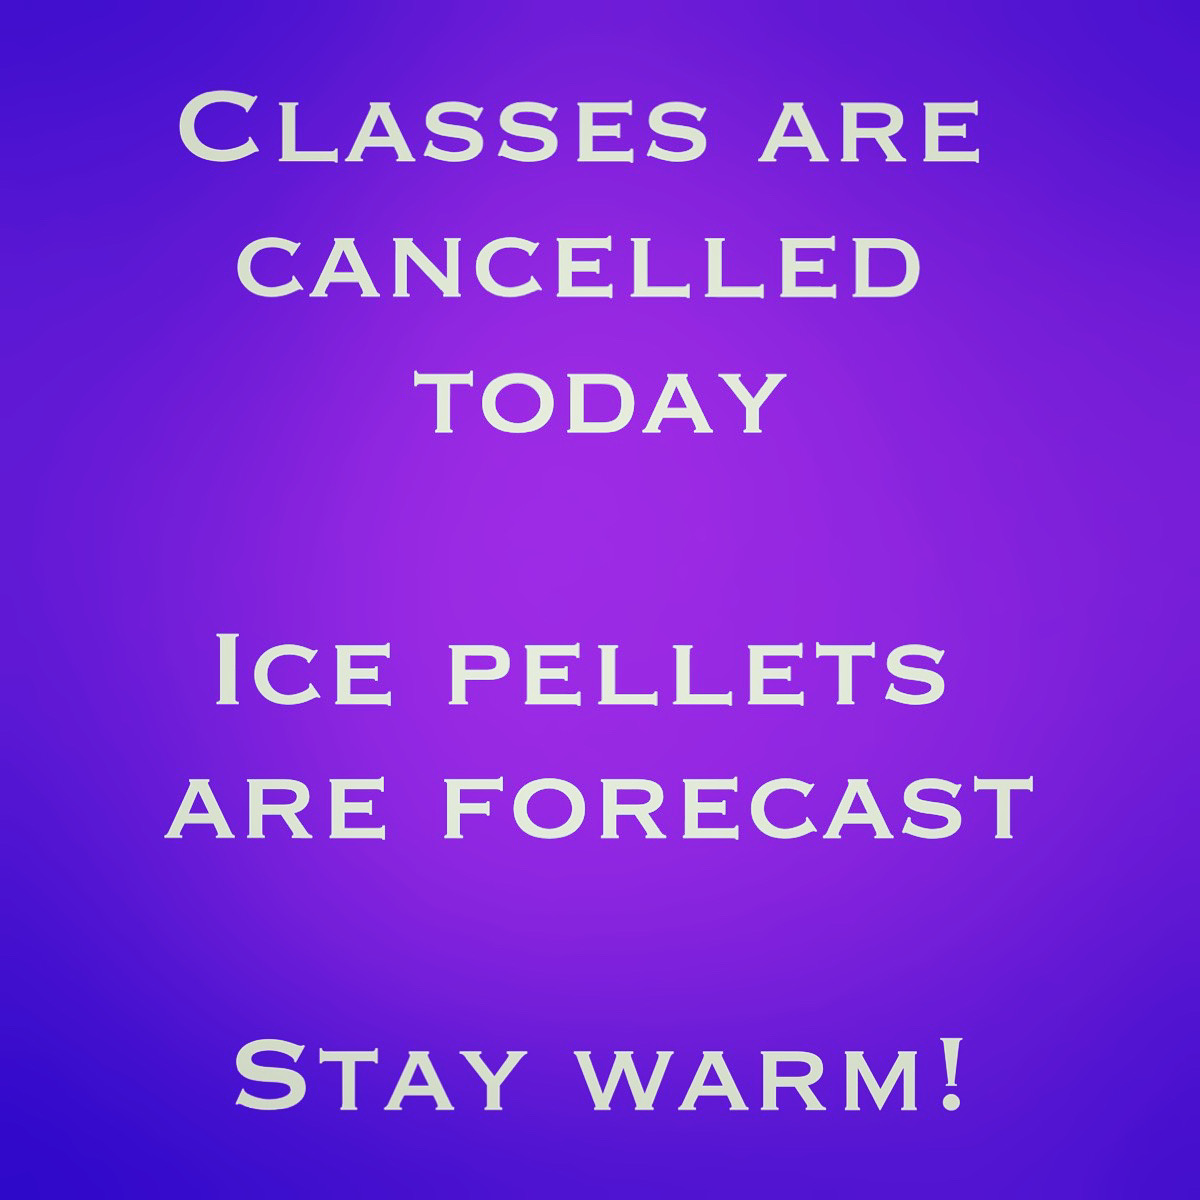 Classes Cancelled - ice pellets forecast